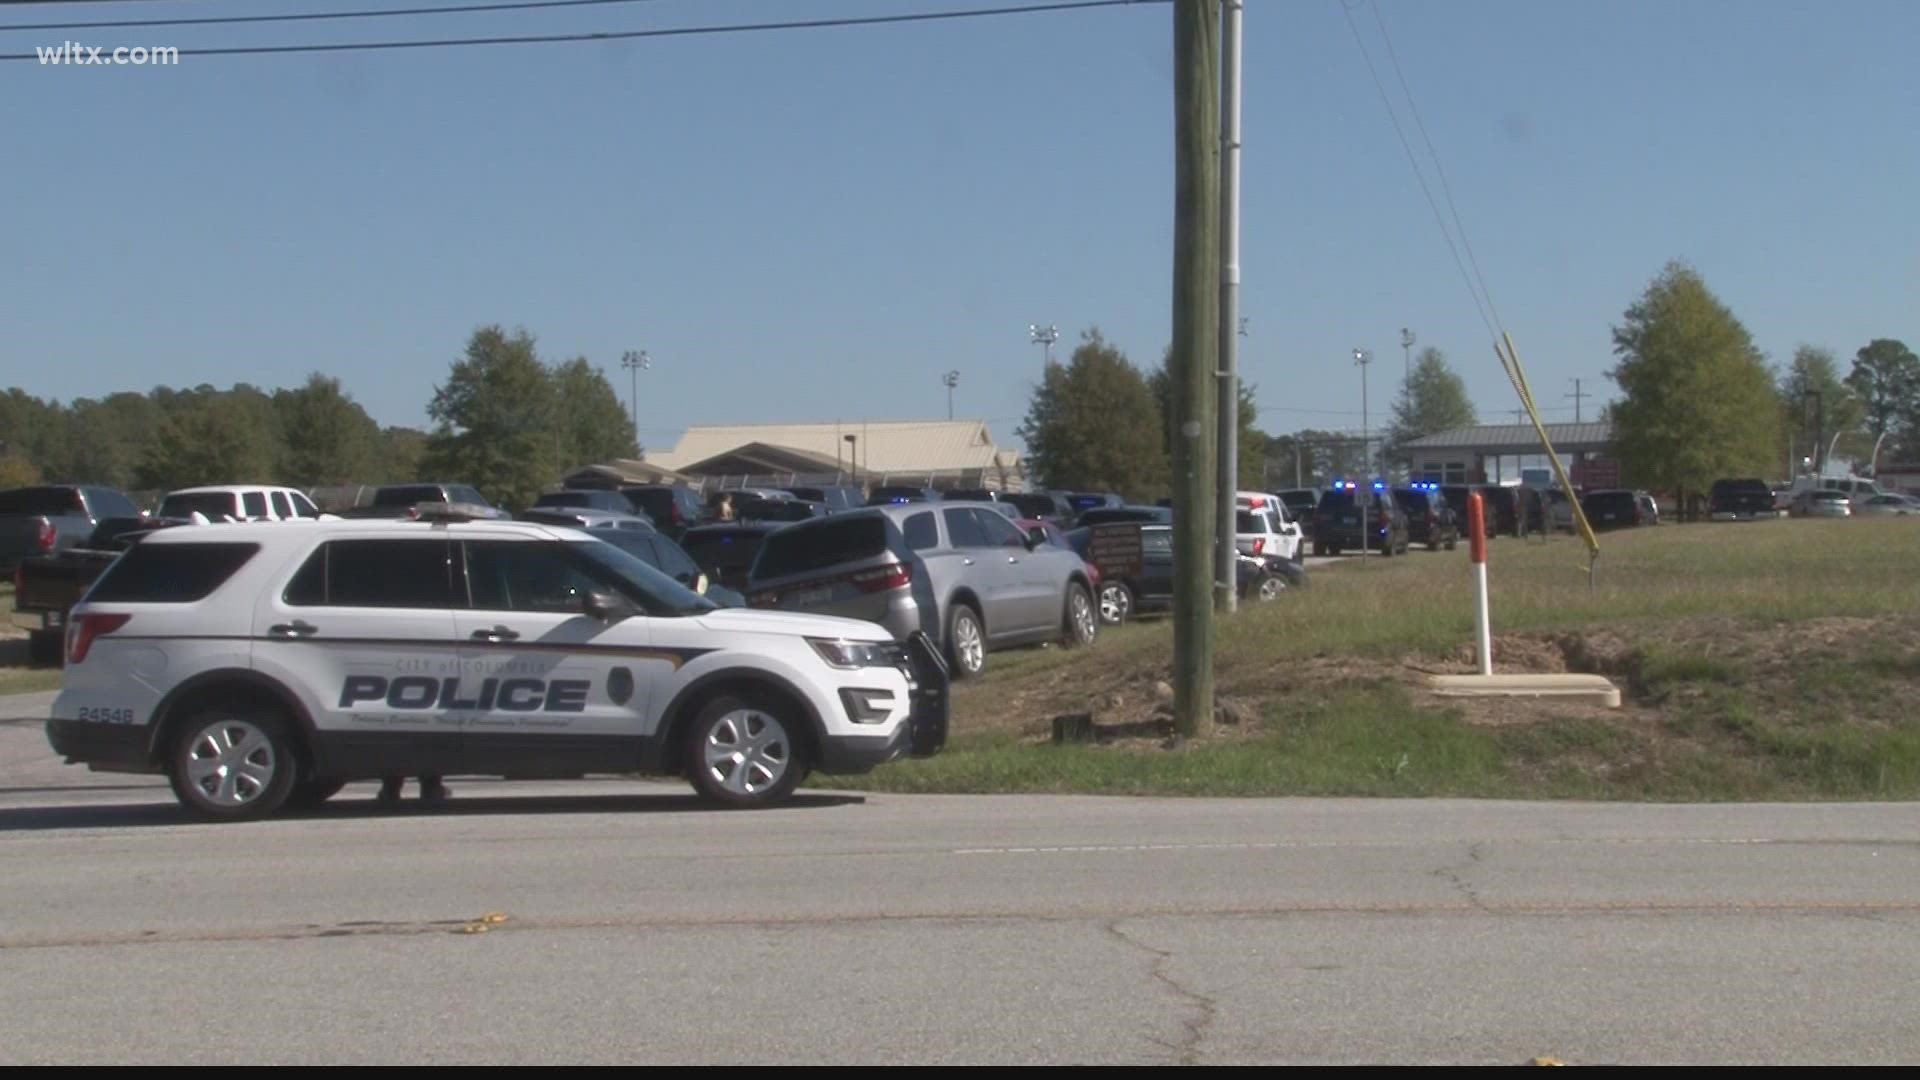 The incident began at 9 a.m. at the South Carolina Department of Juvenile Justice facility in Columbia.